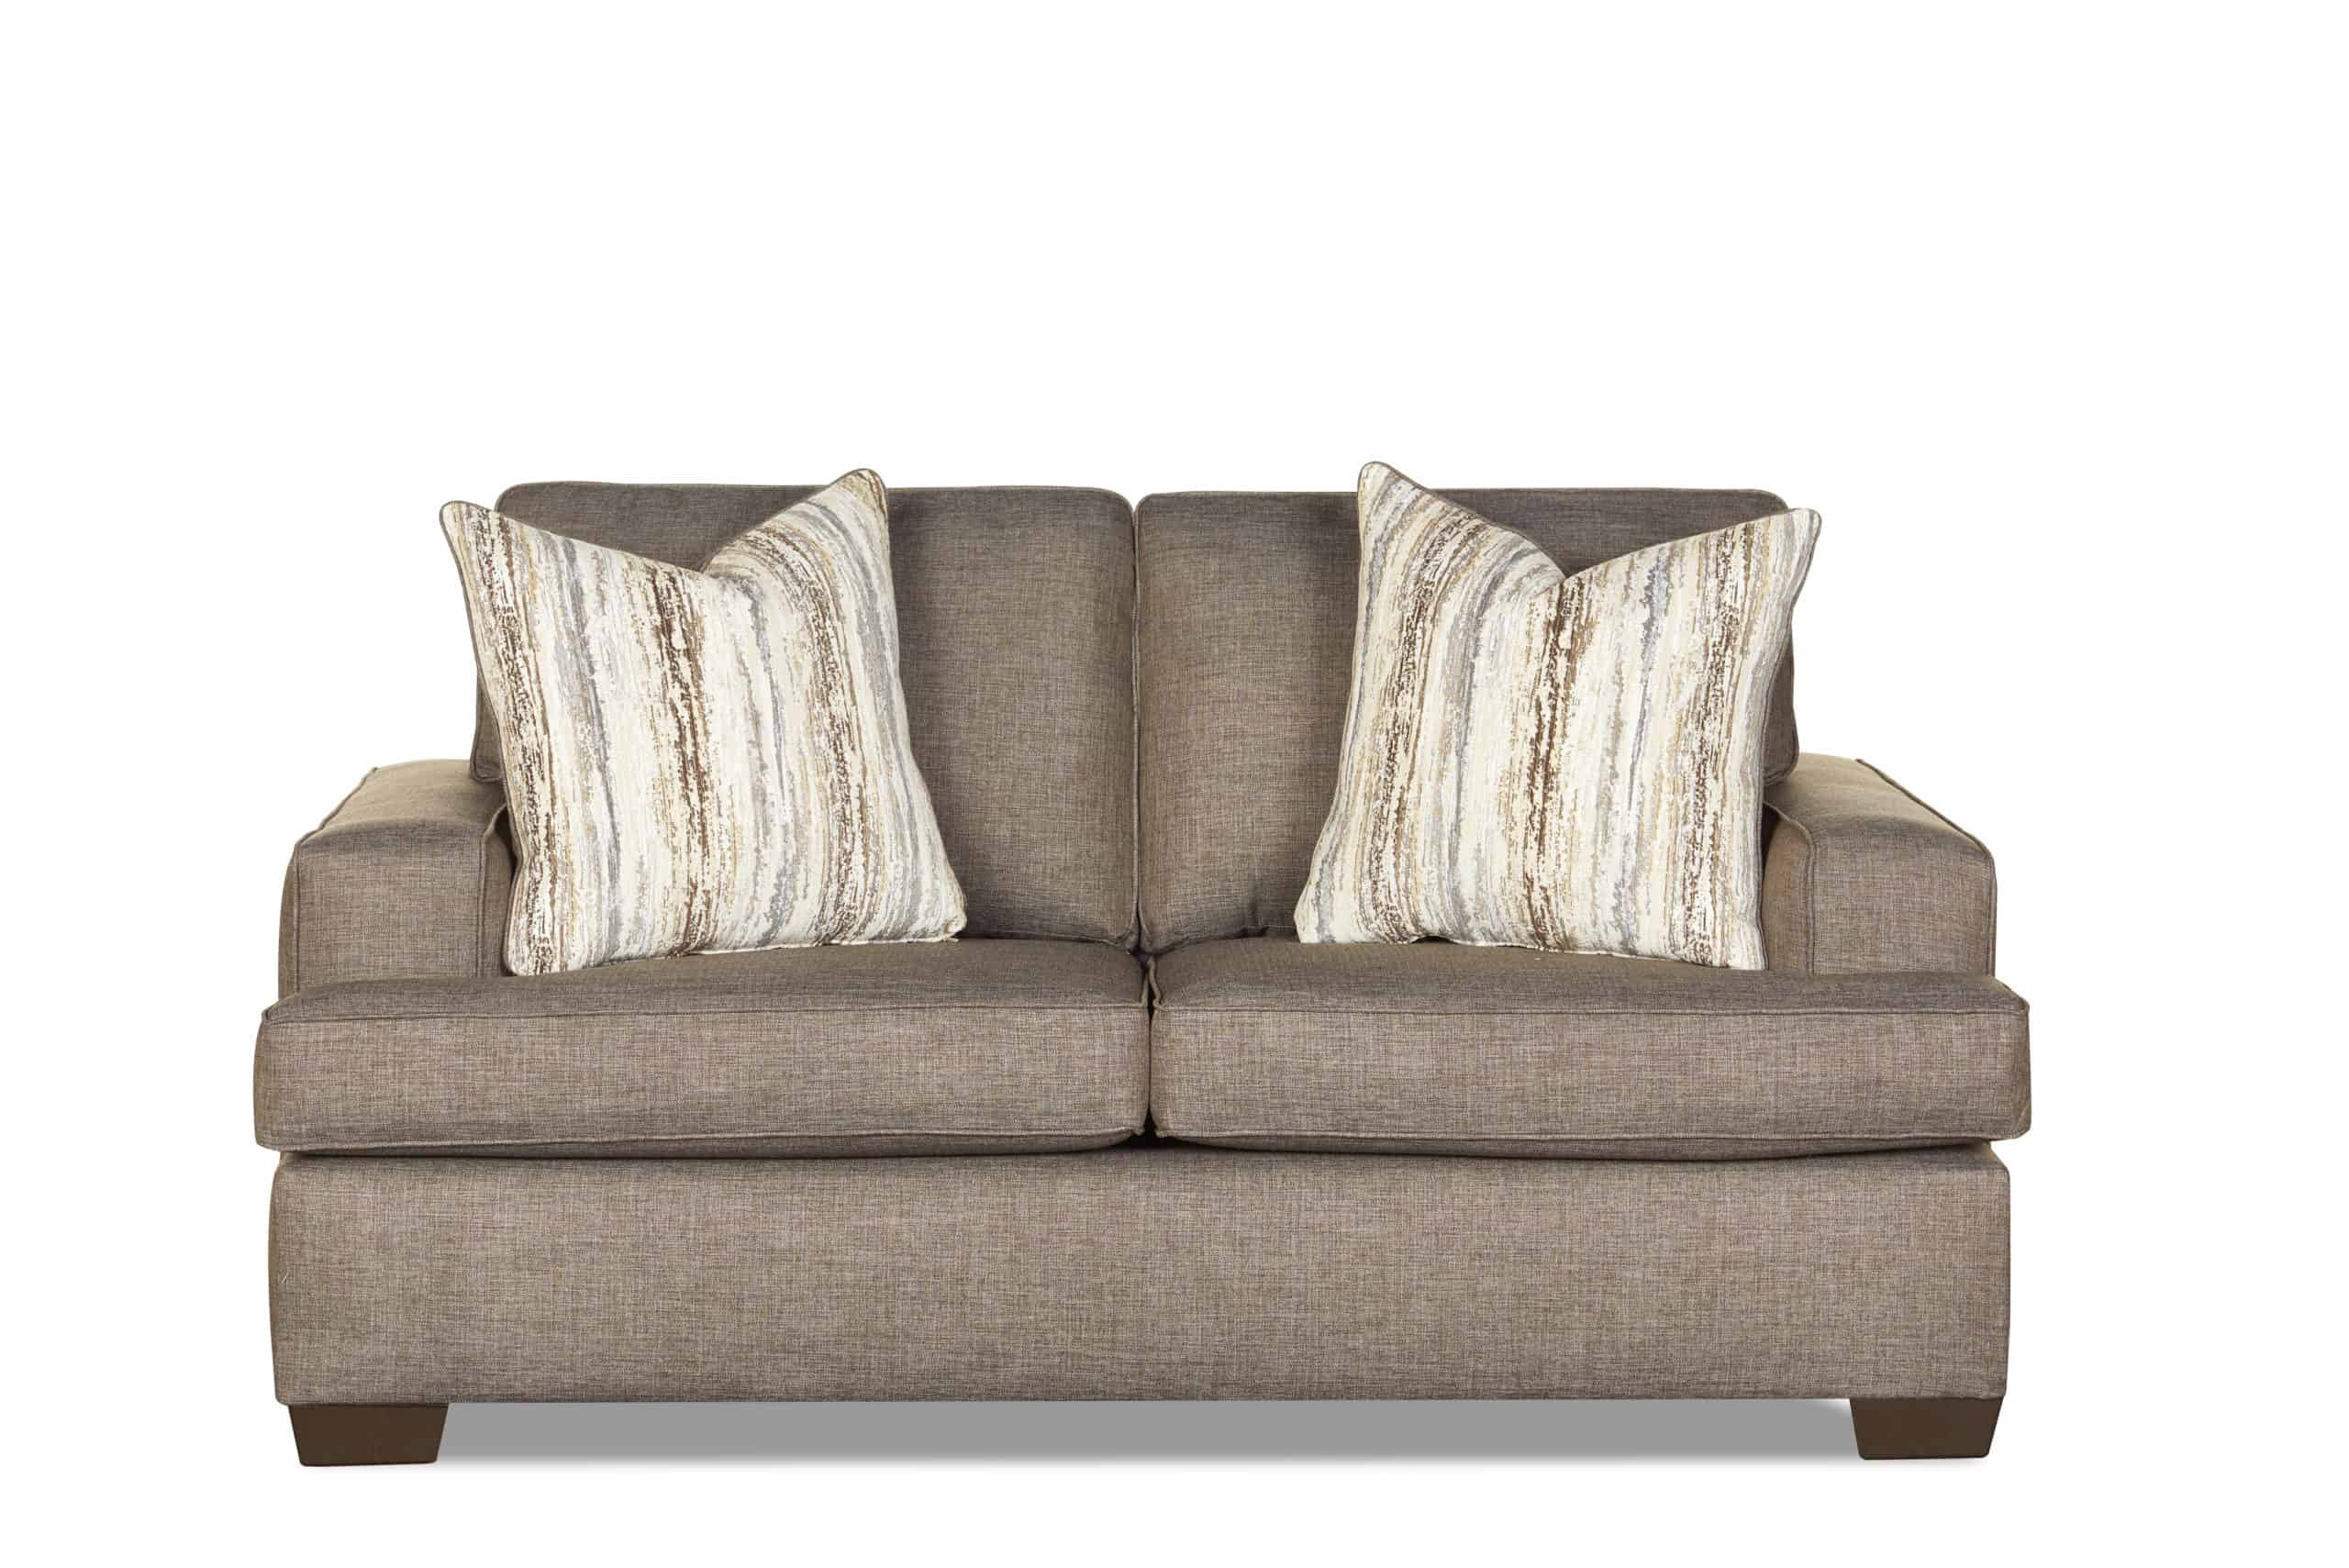 Fairview Sly After Dark Loveseat